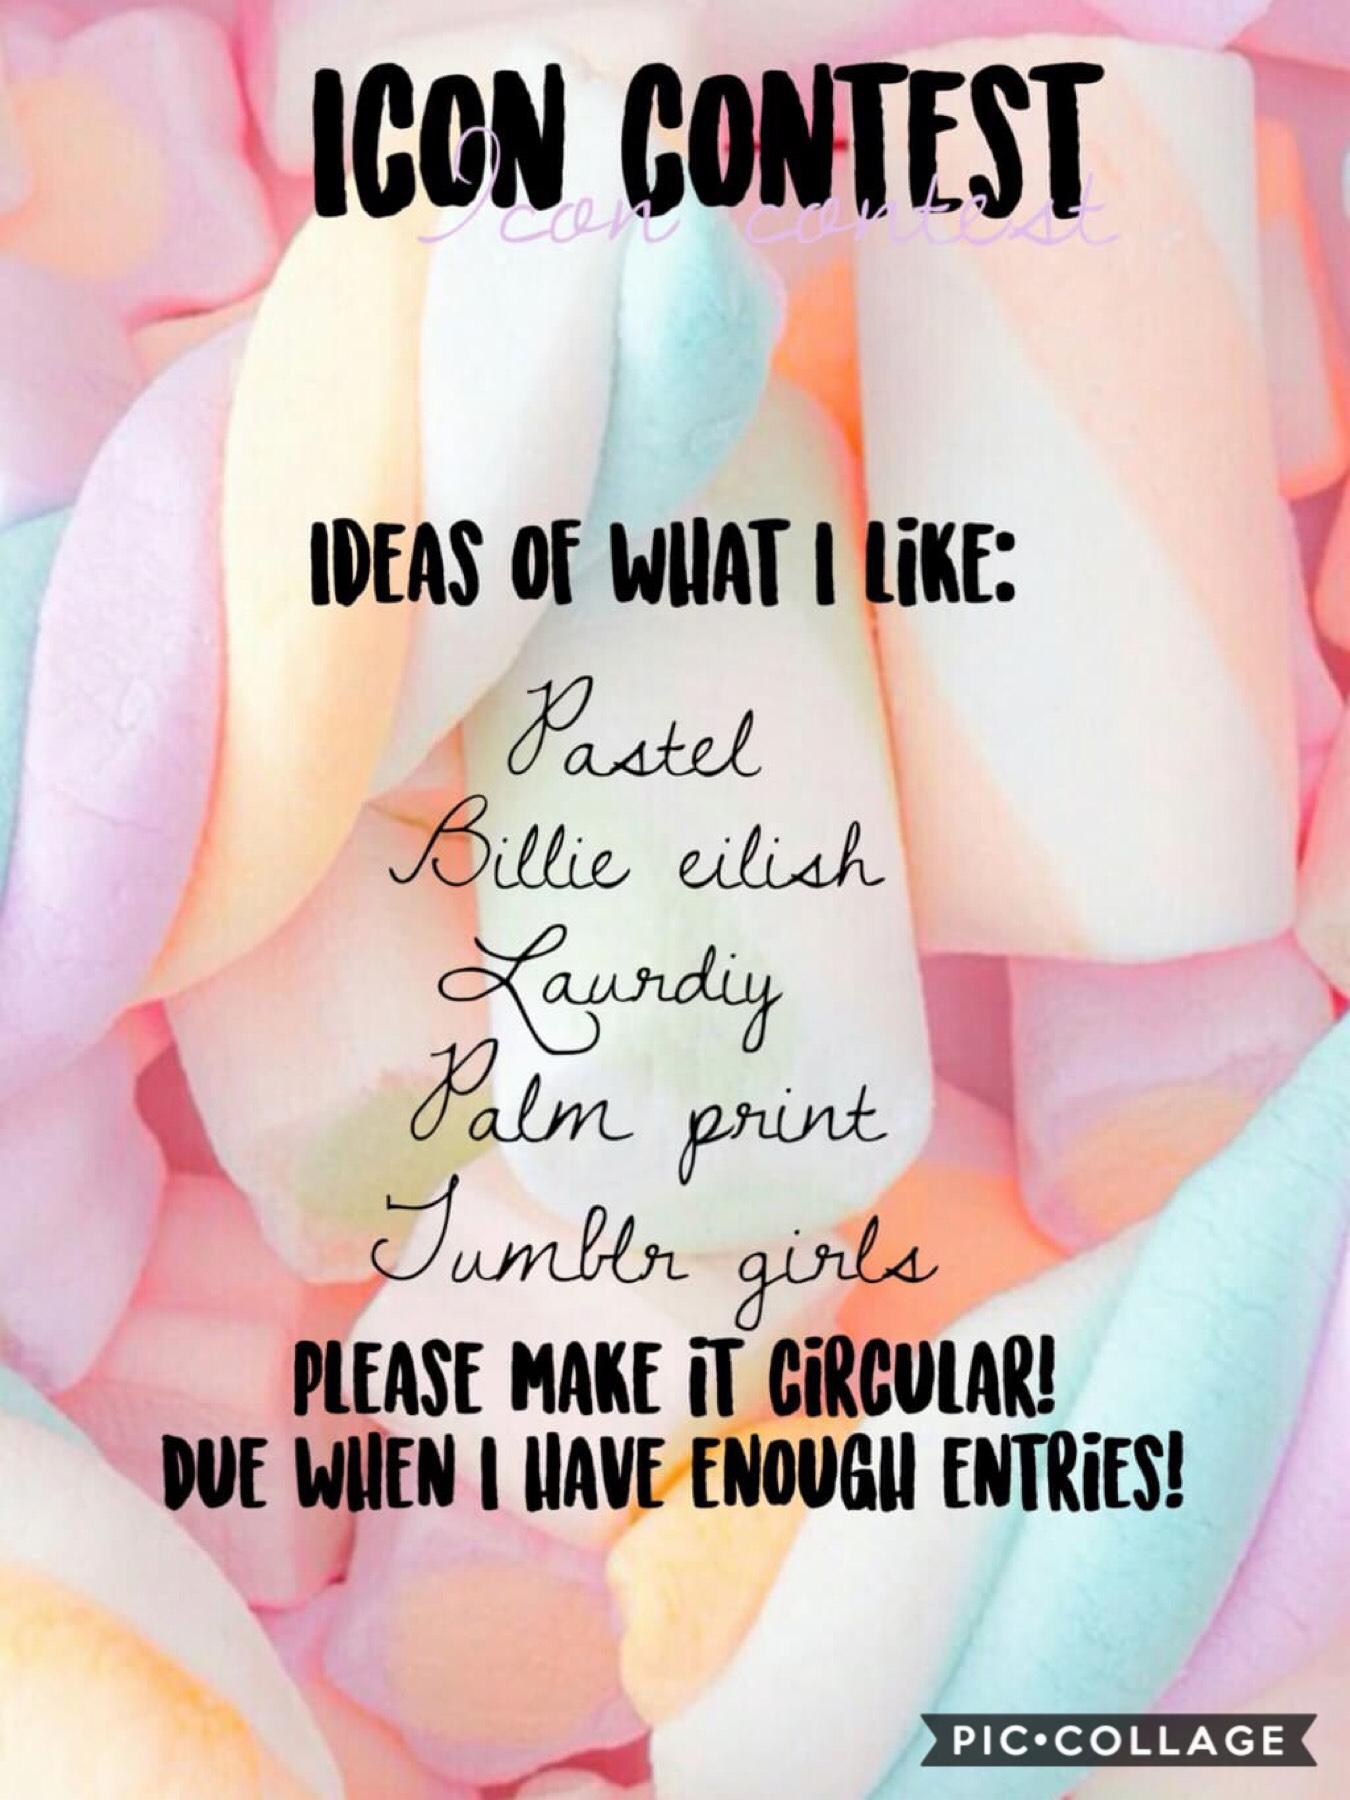 ANOTHER ICON CONTEST!!!! 💓 